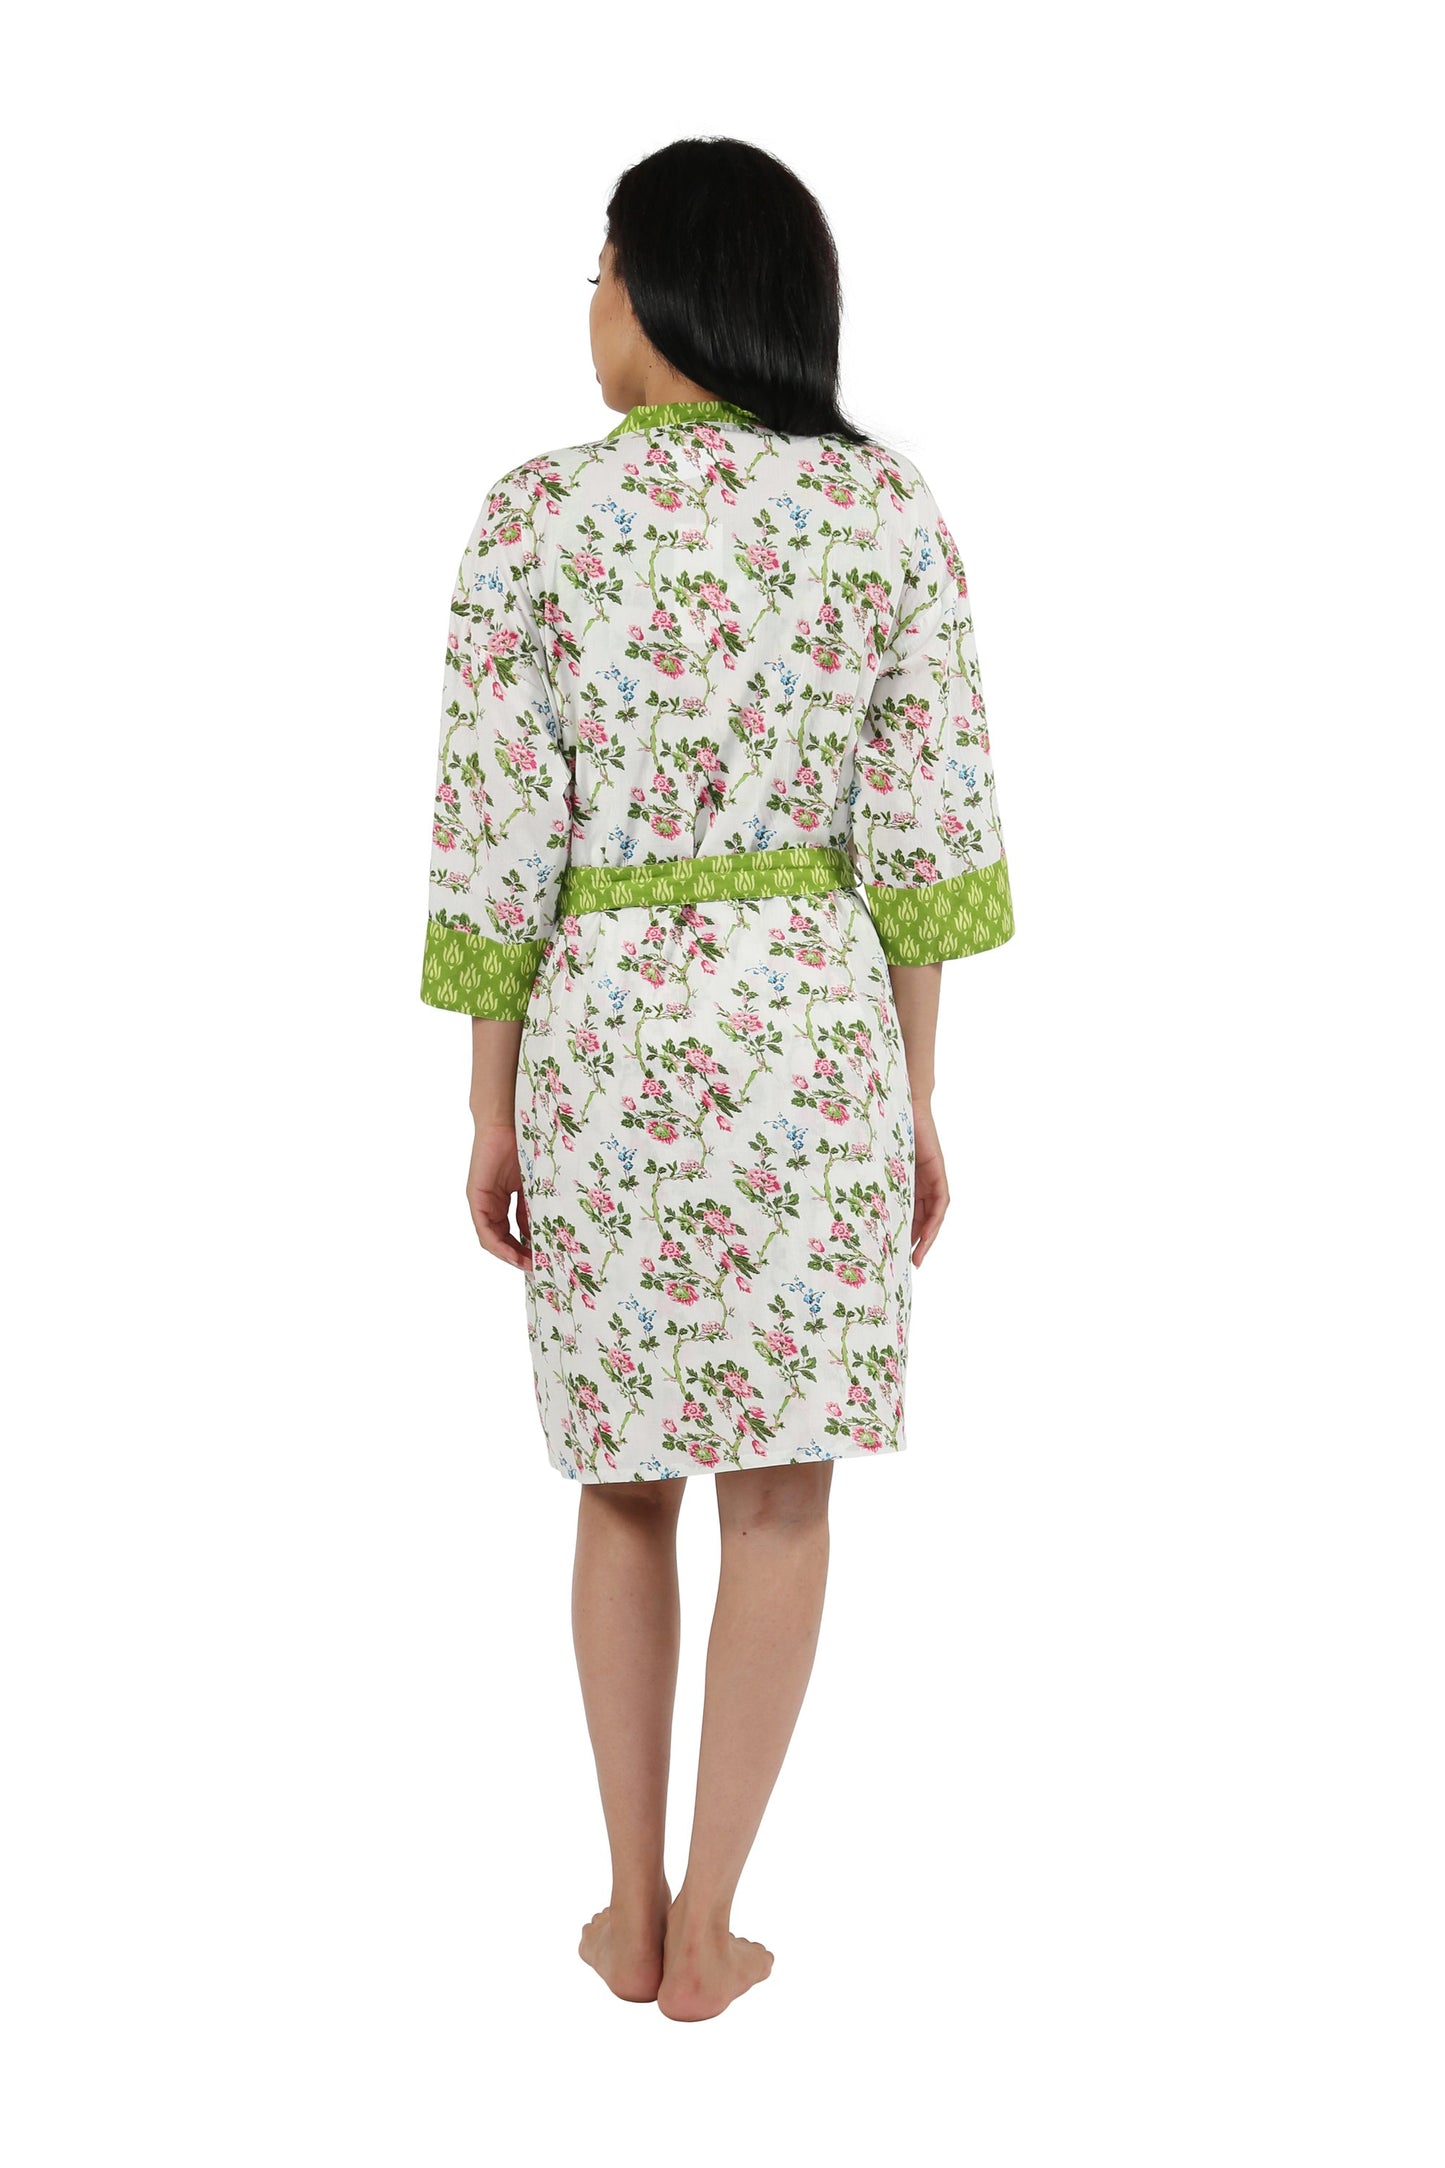 100% Cotton Floral Robe 1815F - Ivory/Green Floral